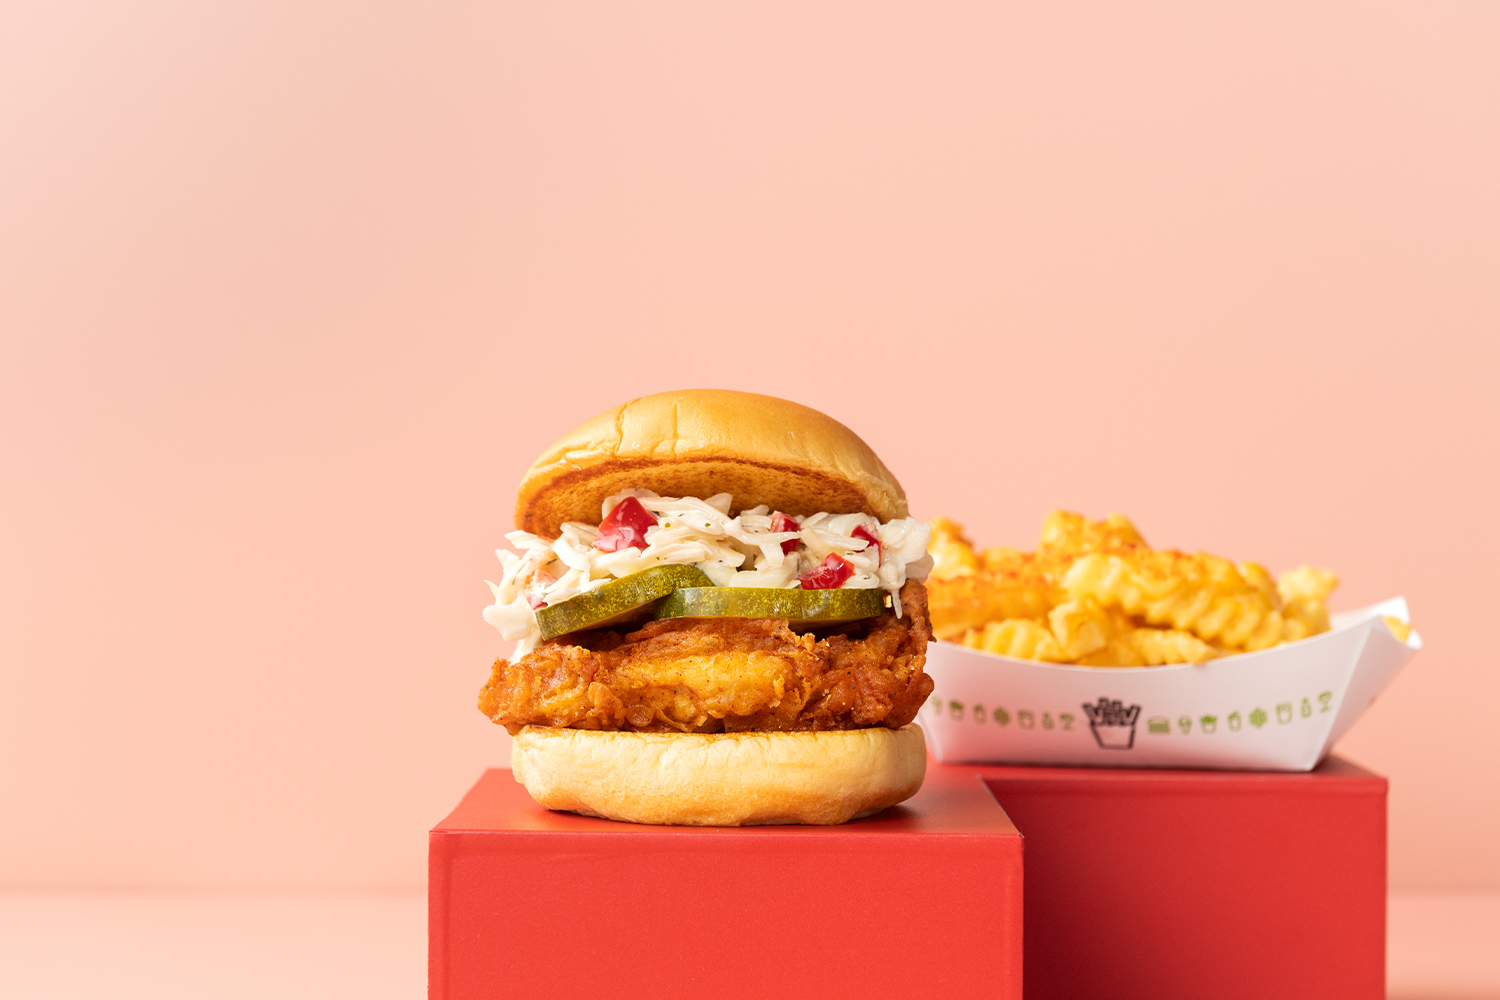 PHOTO:  Hot Chick’n sandwich returns to Shake Shack along with new Hot Chick’n Bites, Hot Spicy Fries and Hot Spicy Cheese Fries made with guajillo and cayenne pepper dusting.
